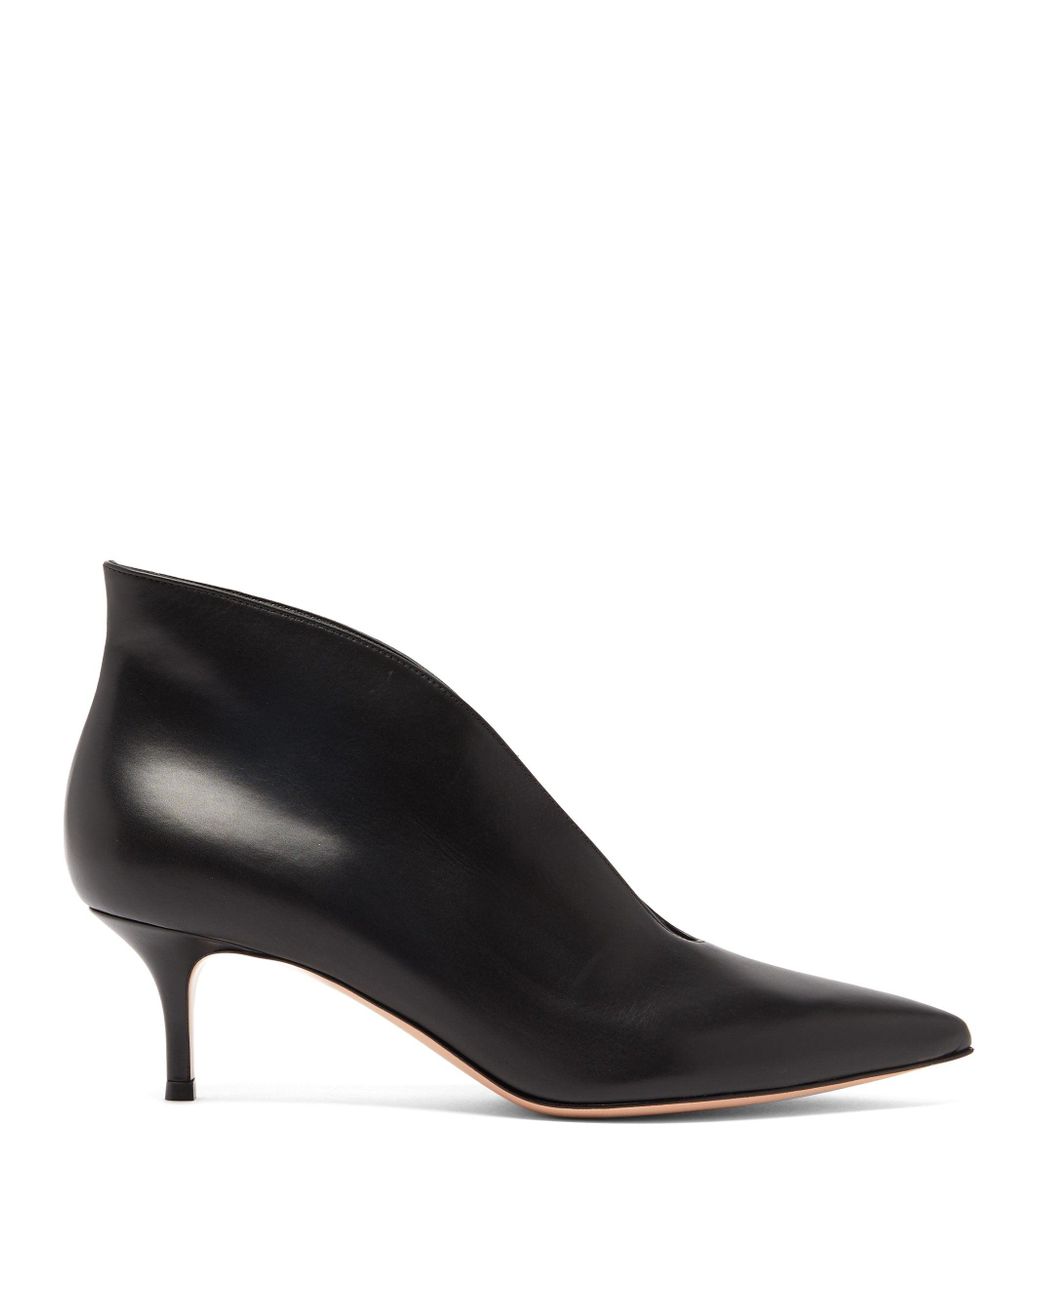 Gianvito Rossi Vania 55 Leather Ankle Boots in Black | Lyst